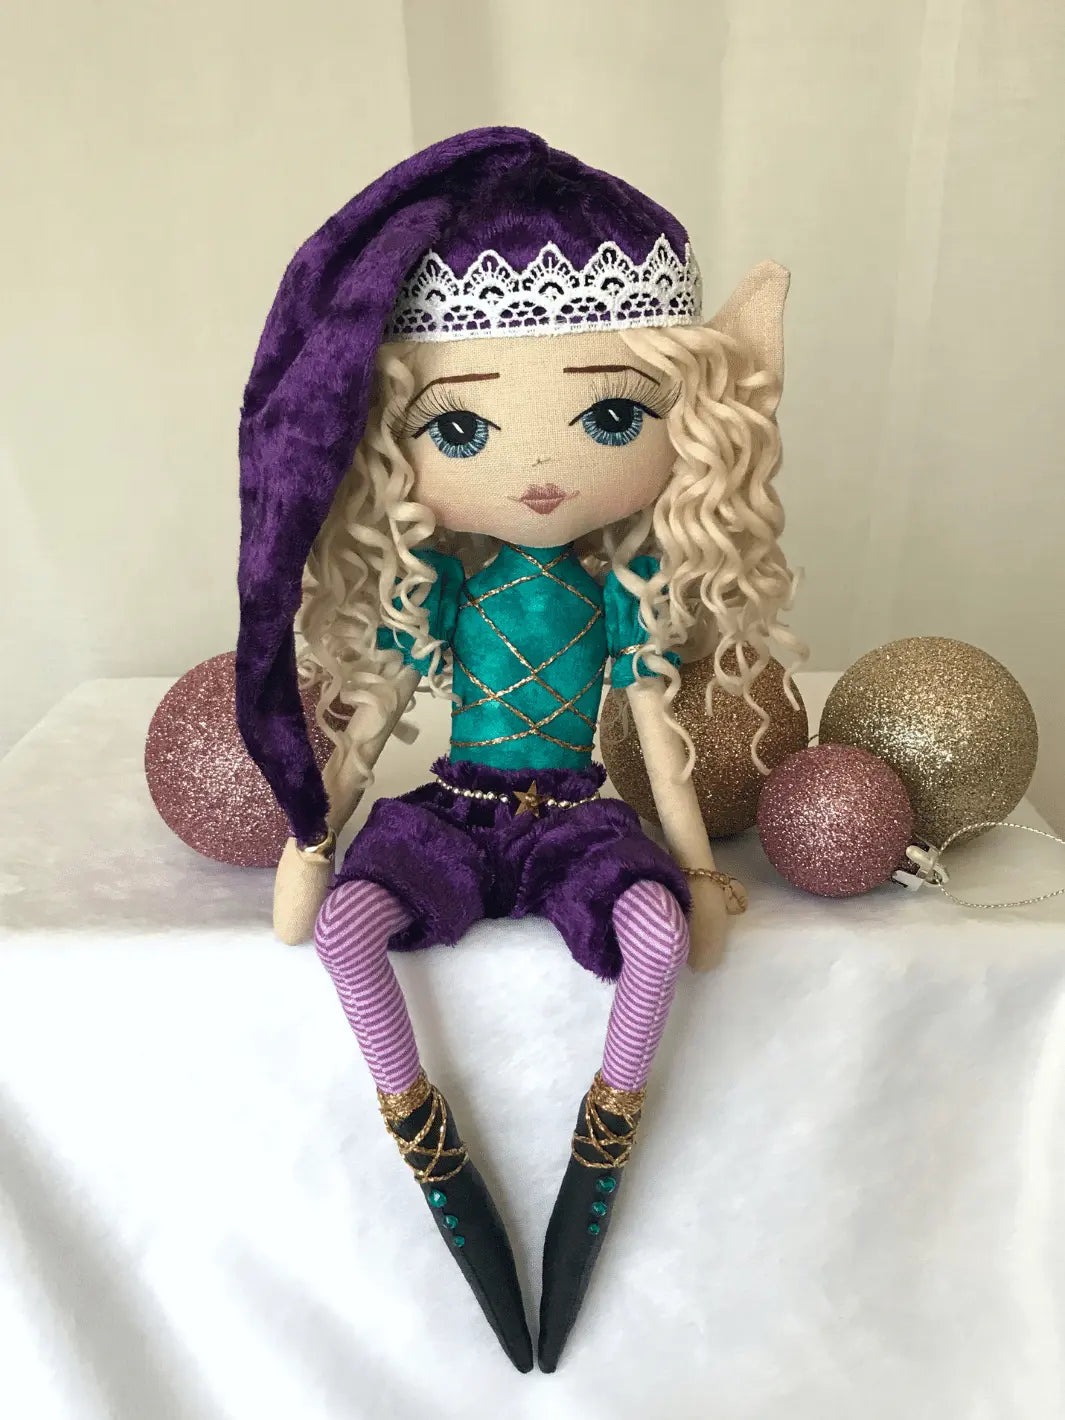 handmade christmas elf doll sitting on a shelf wearing purple velvet hat & pants, purple striped tights, teal & gold elf top, long blond curly hair, hand embroidered blue eyes